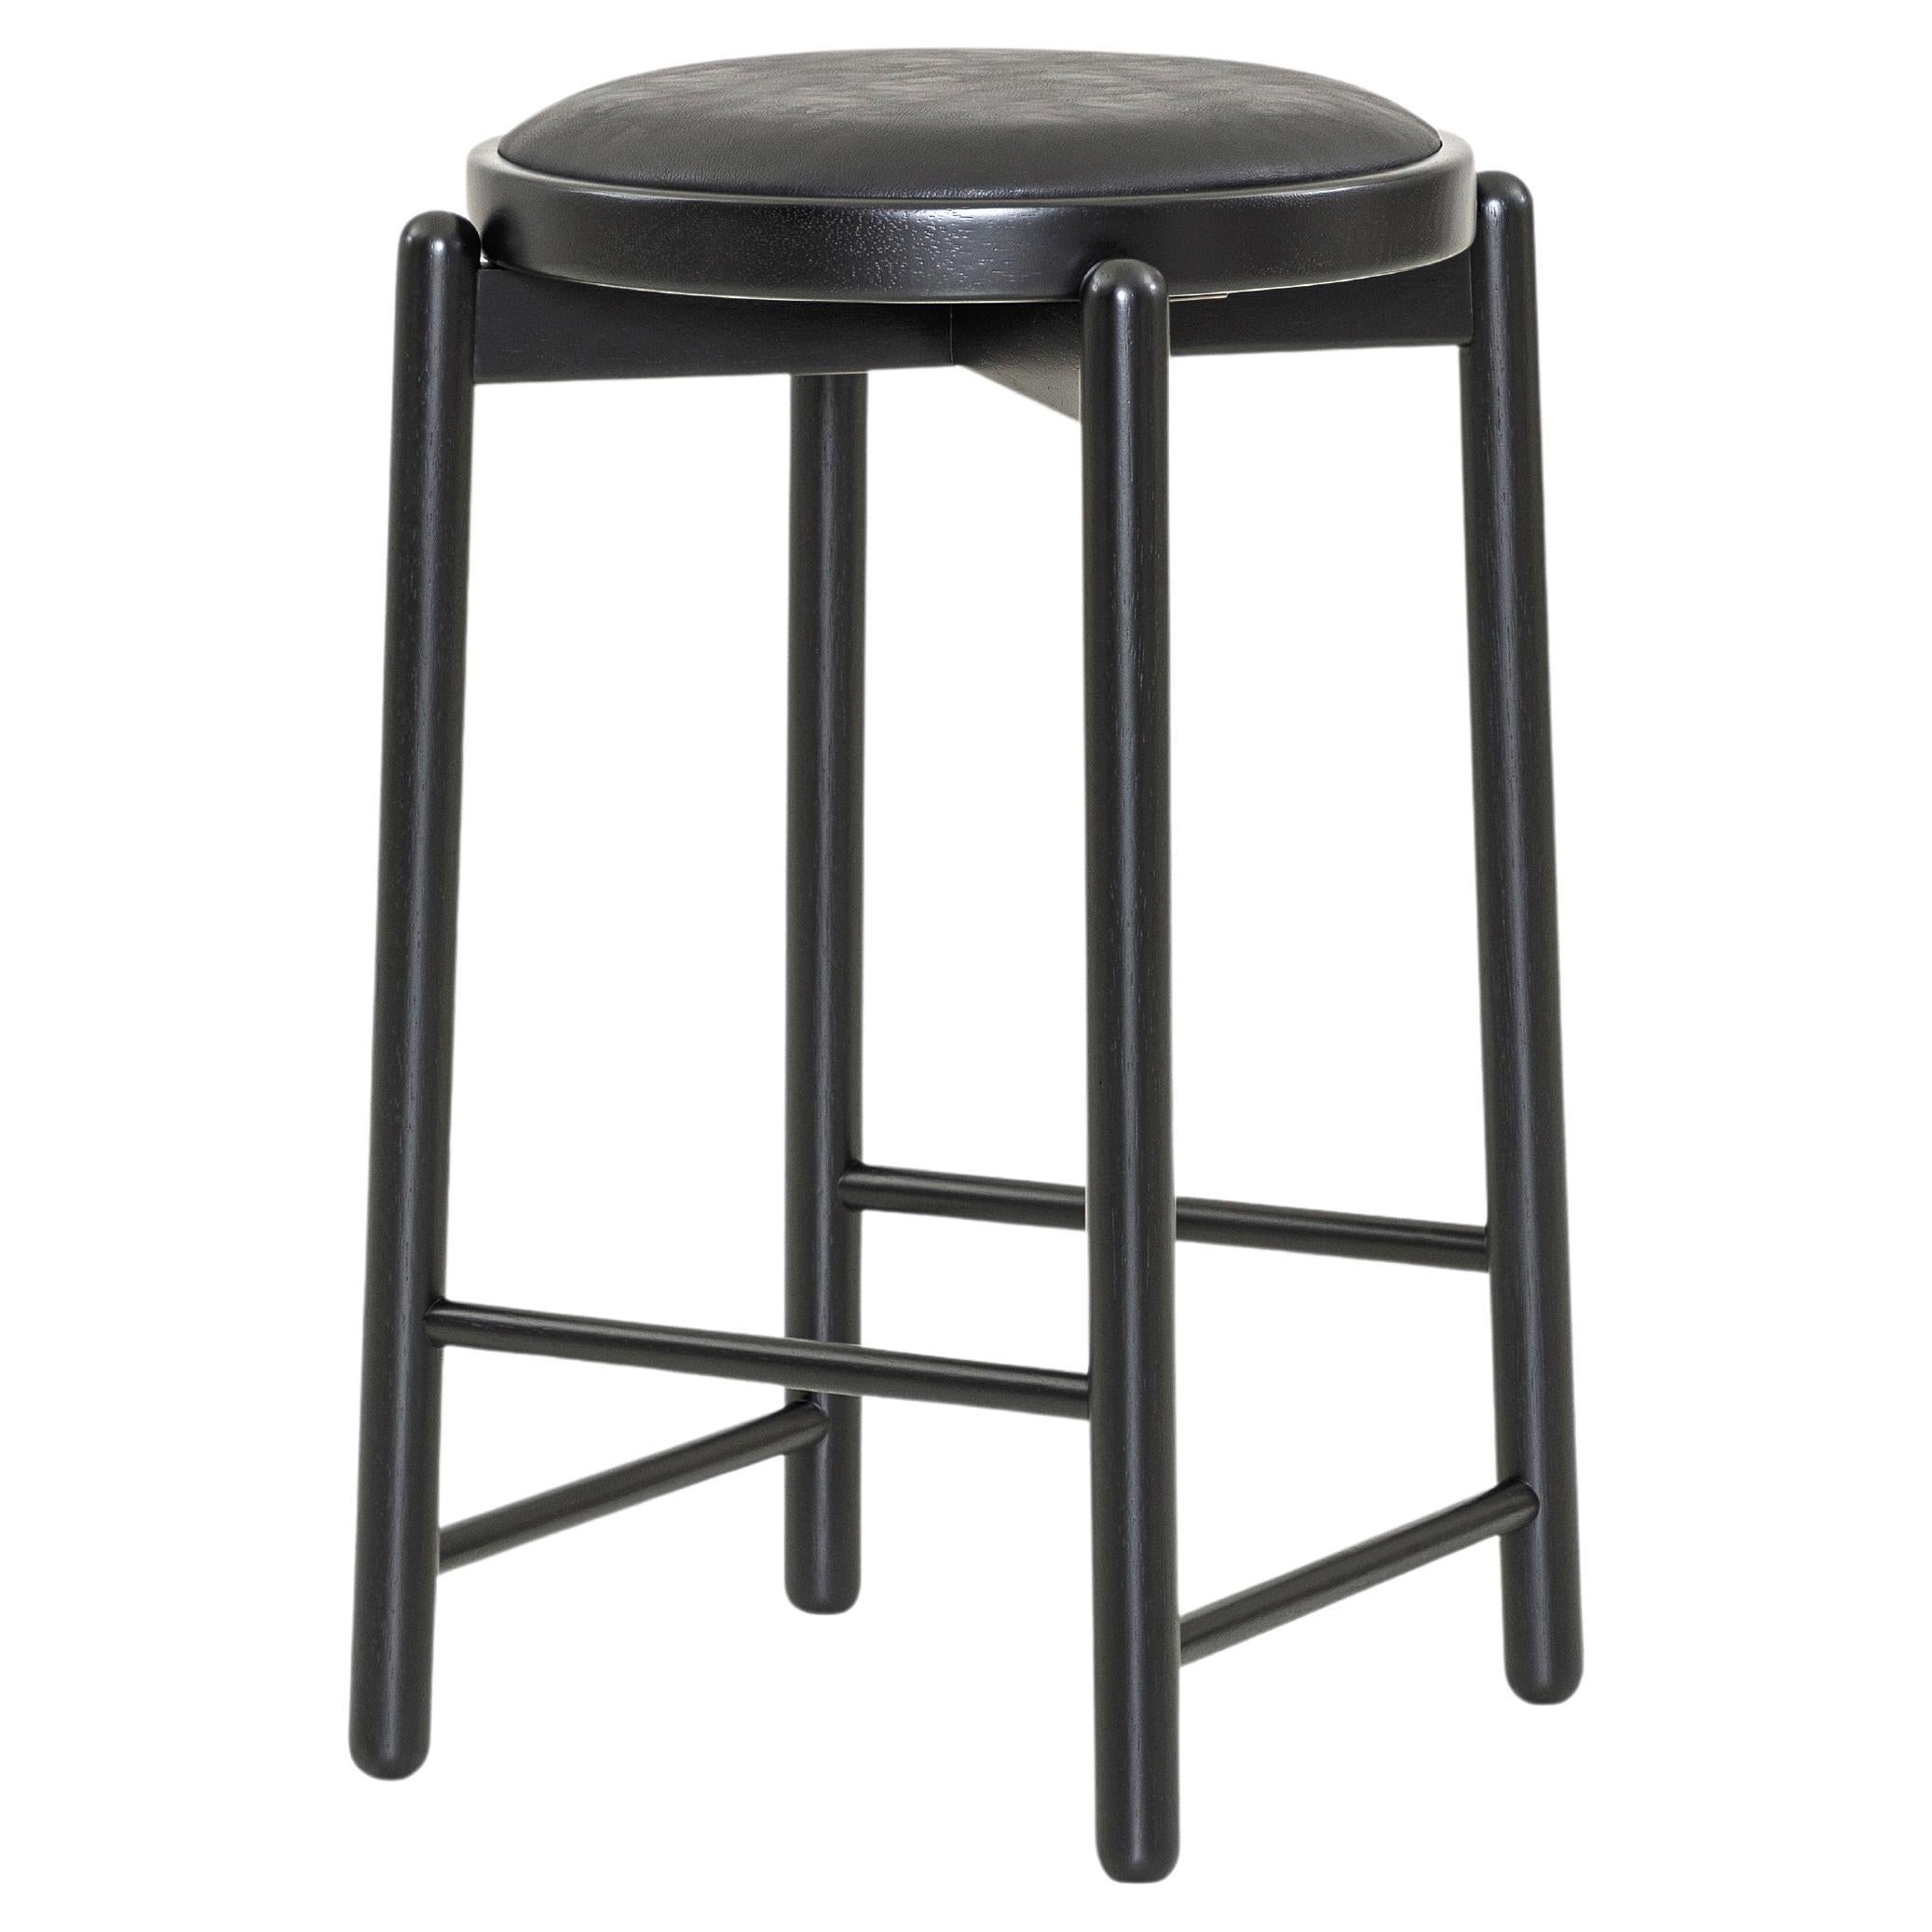 Maru Counter Stool in Black Wood Base and Upholstered Black Seat